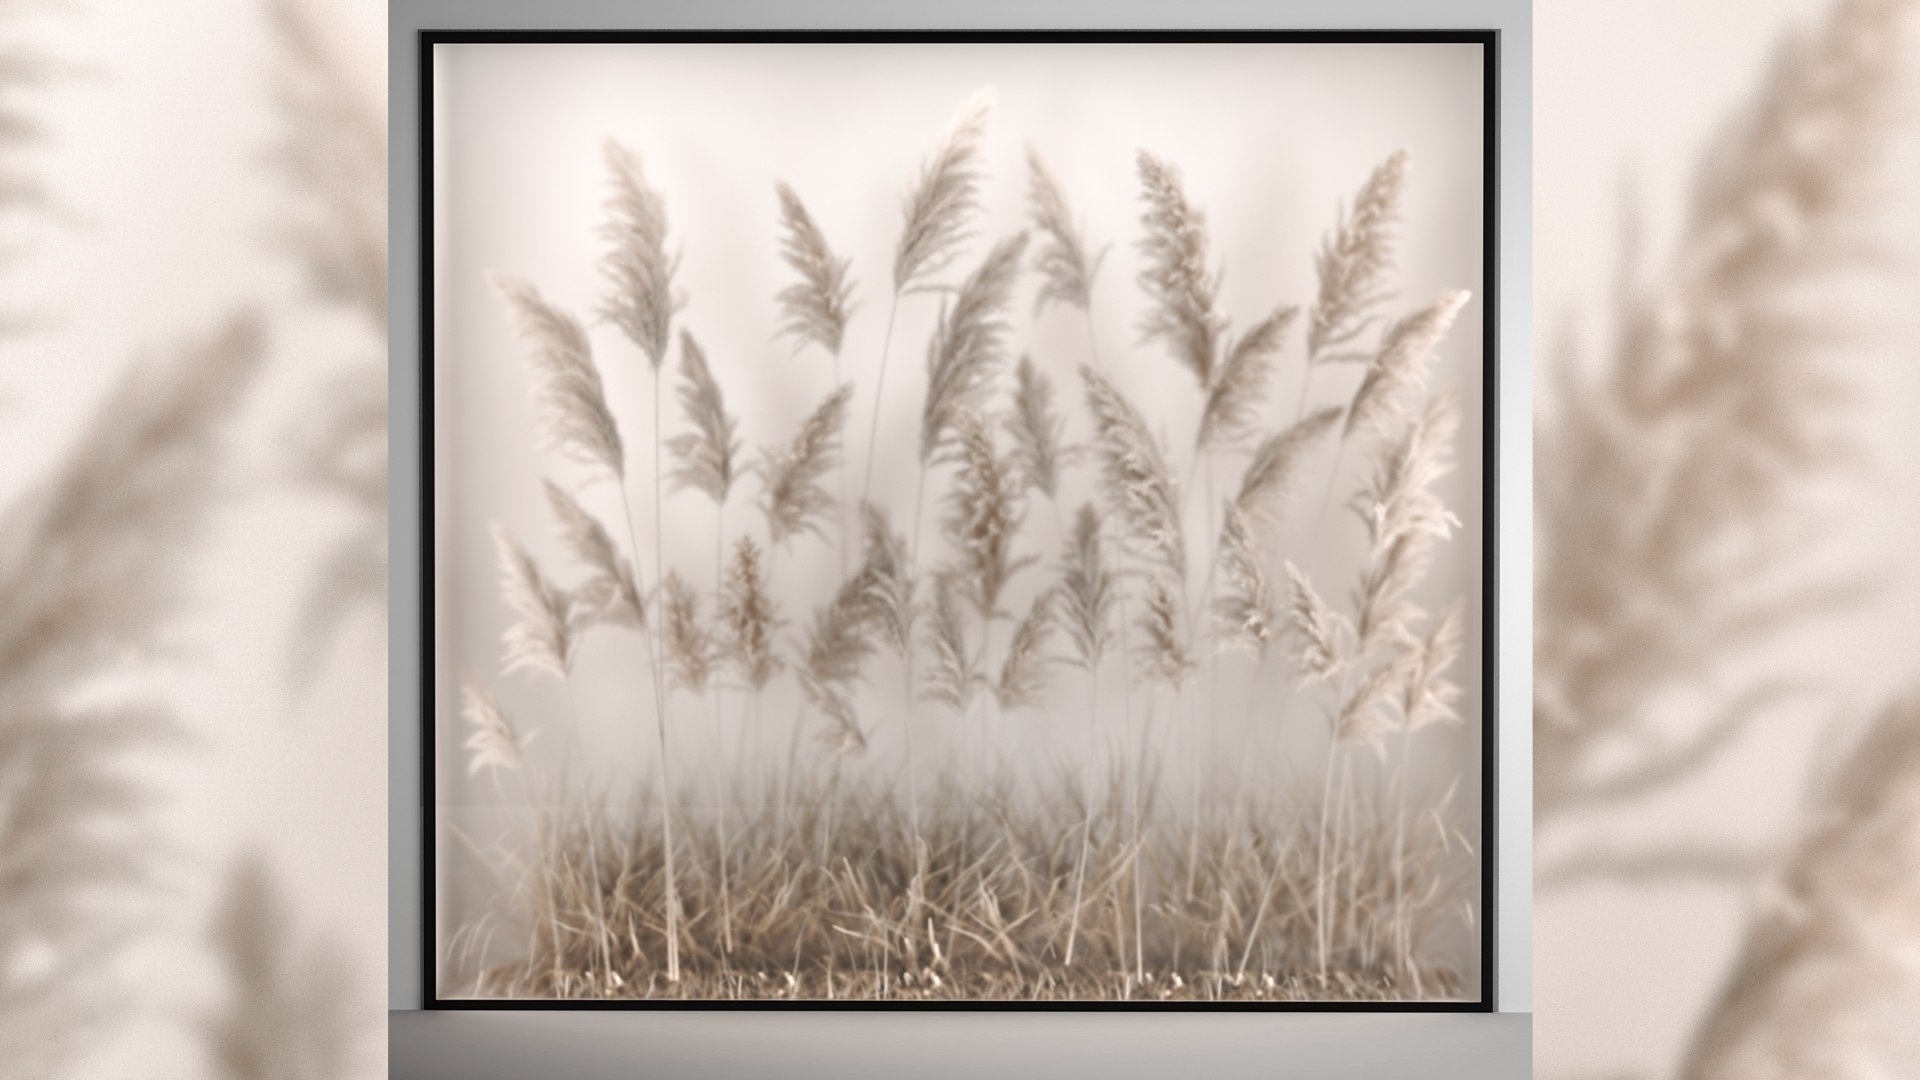 3D Vertical Garden Of Dry Palm Leaves And Pampas Grass - TurboSquid 1950447